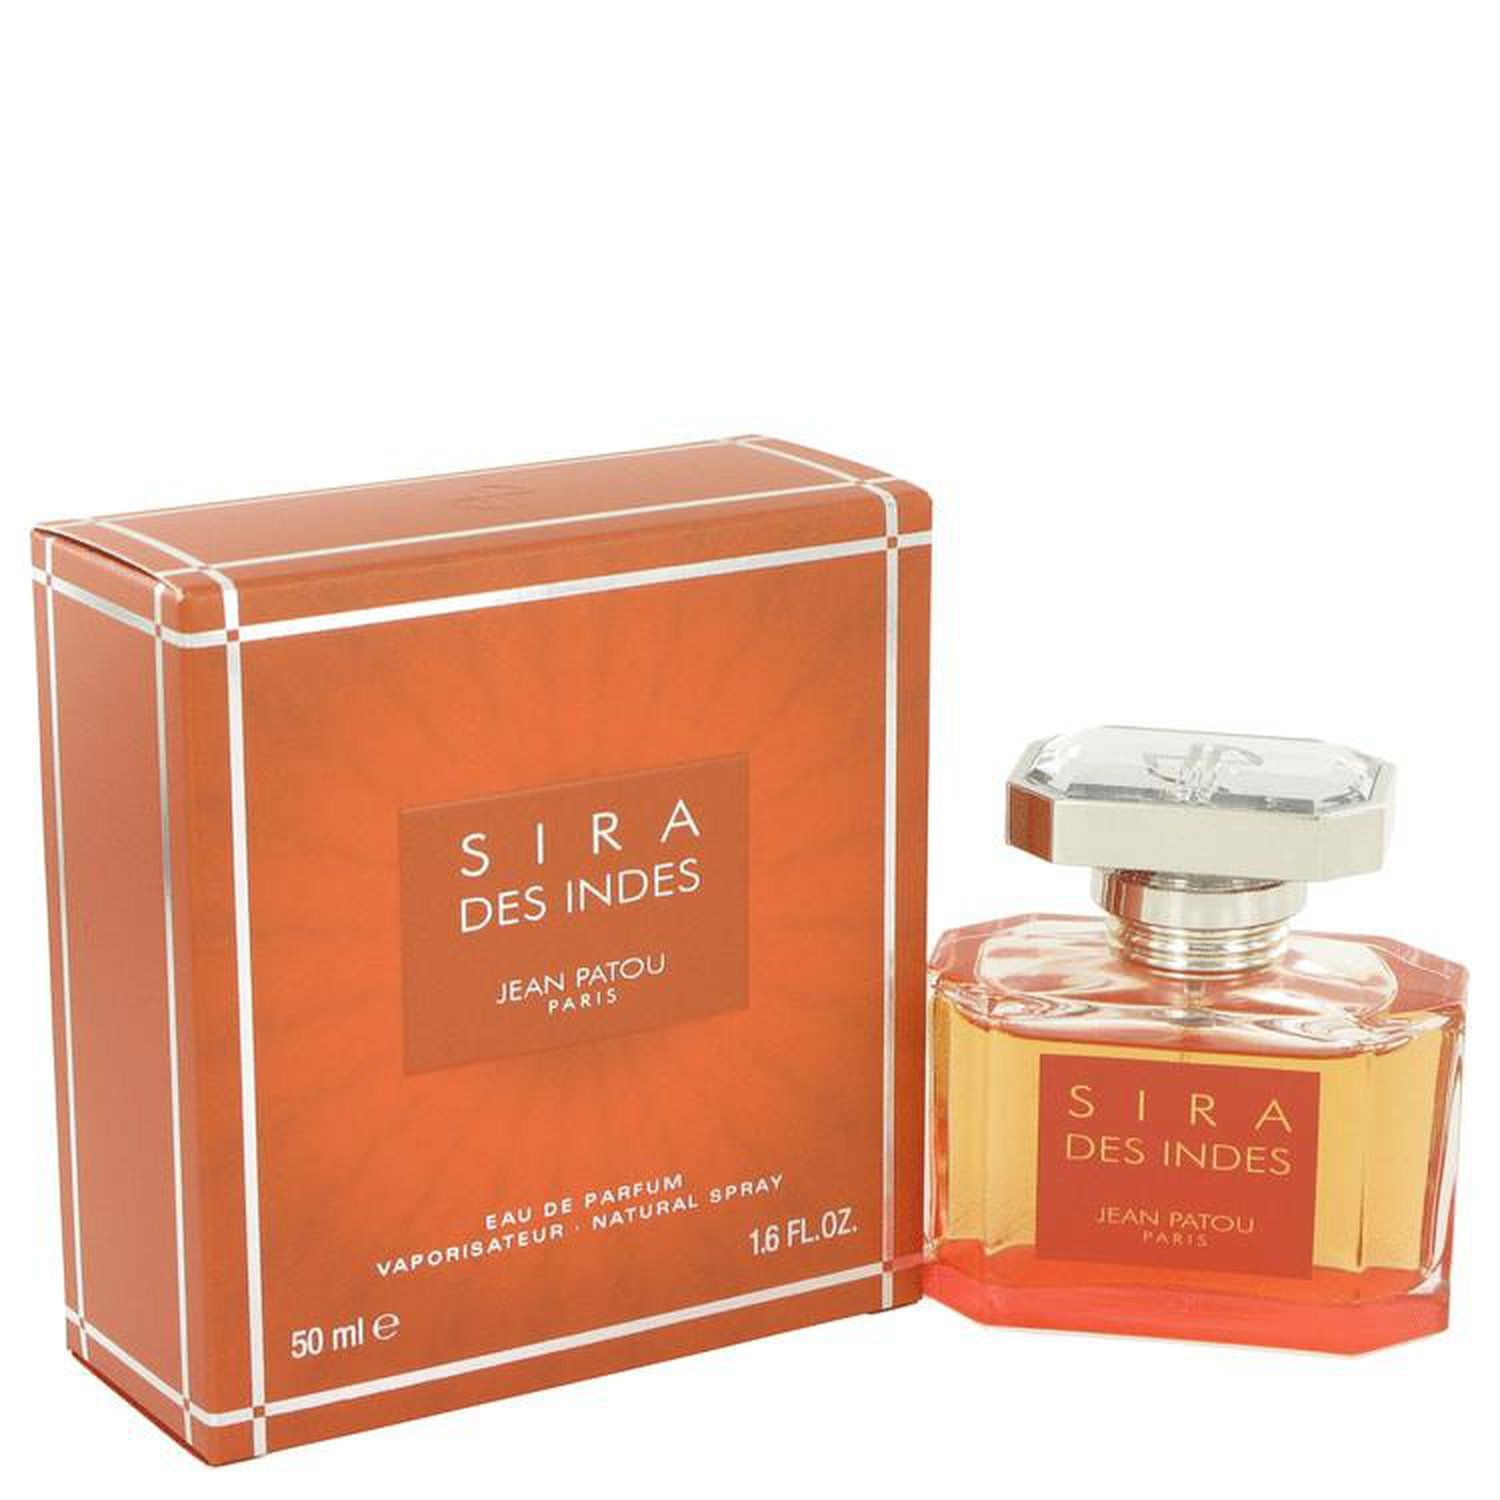 Sira Des Indes by Jean Patou EDP 50ml Boxed